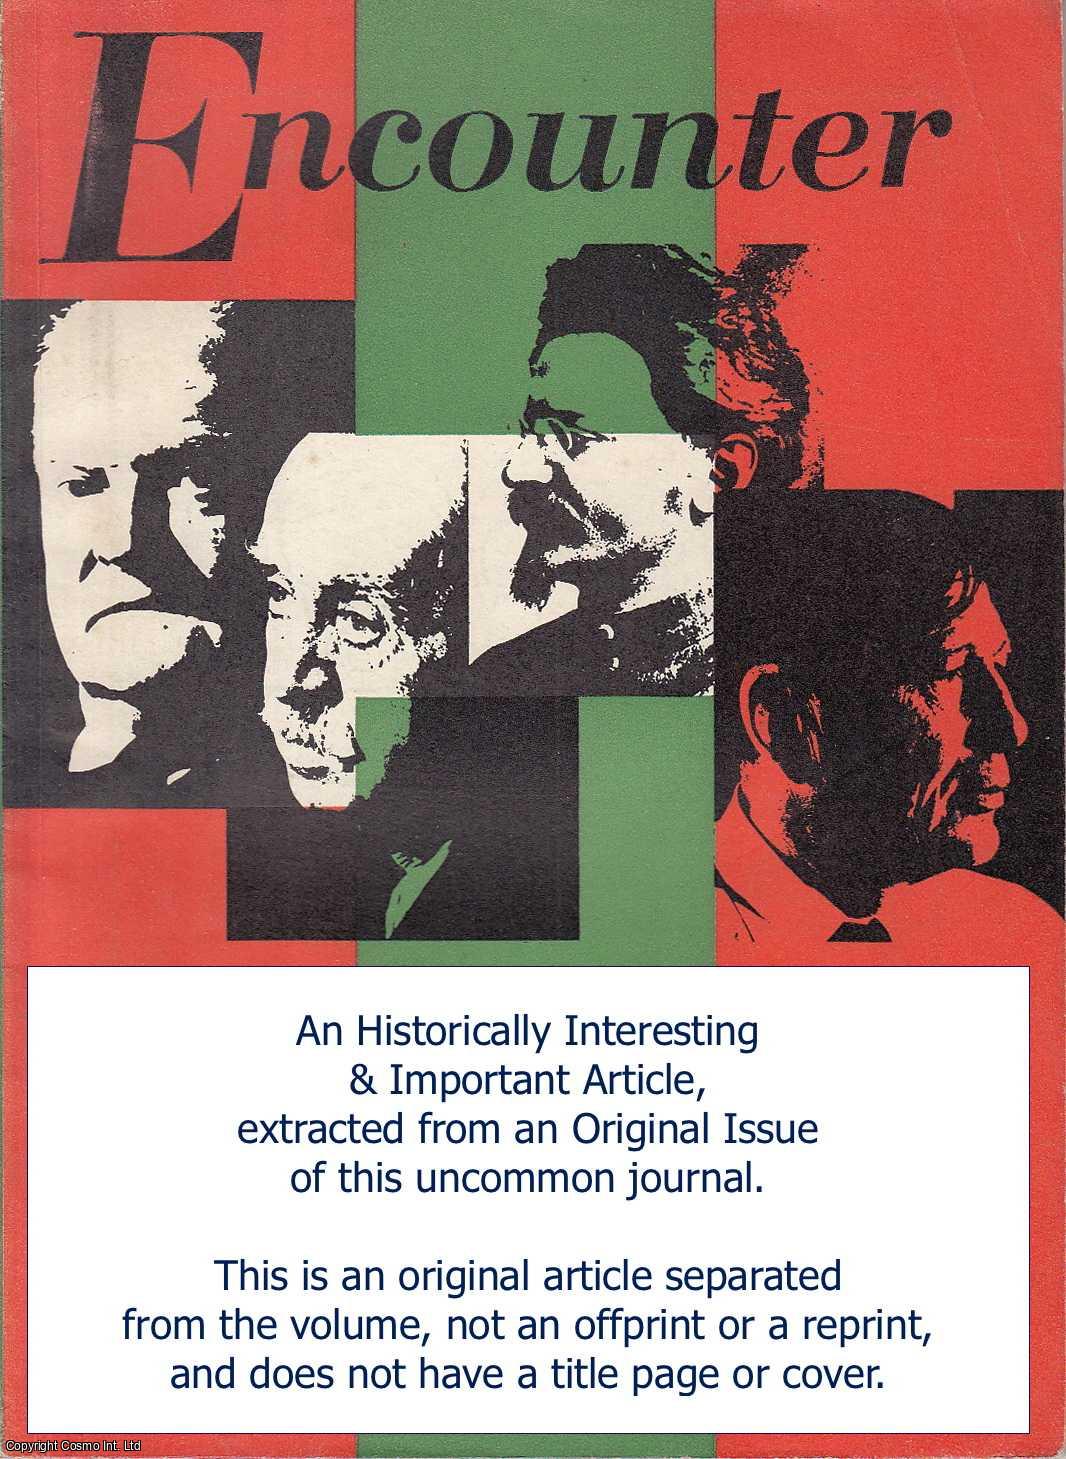 Patricia Hutchins - James Joyce's Correspondence. An original article from Encounter, a monthly review of literature, the arts and politics, 1956.